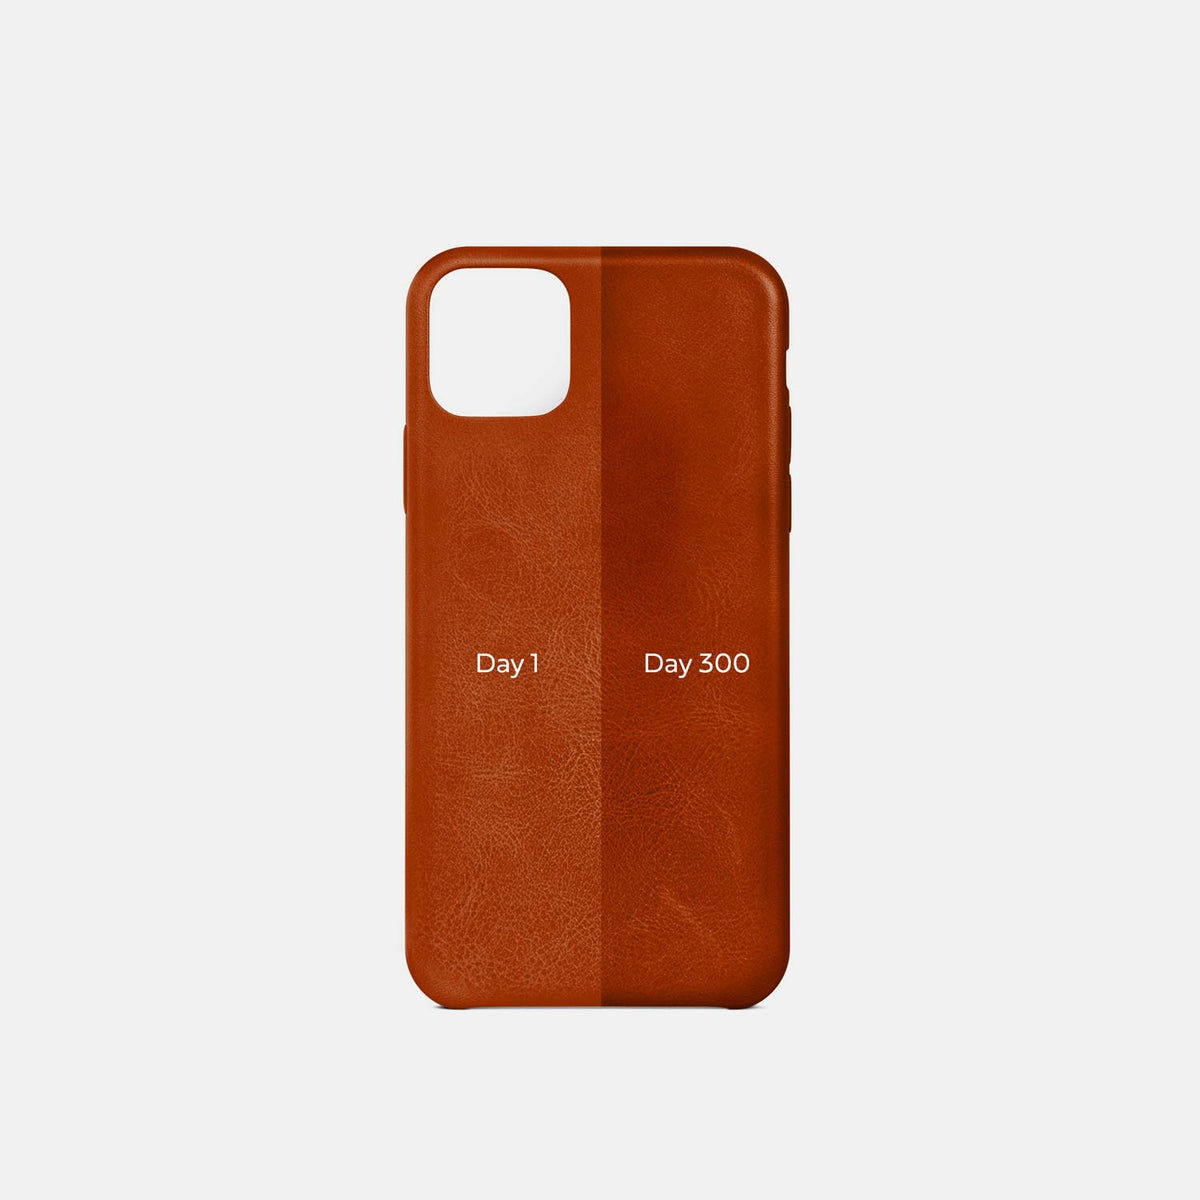 Leather iPhone X/Xs Shell Case - Saddle Brown - RYAN London